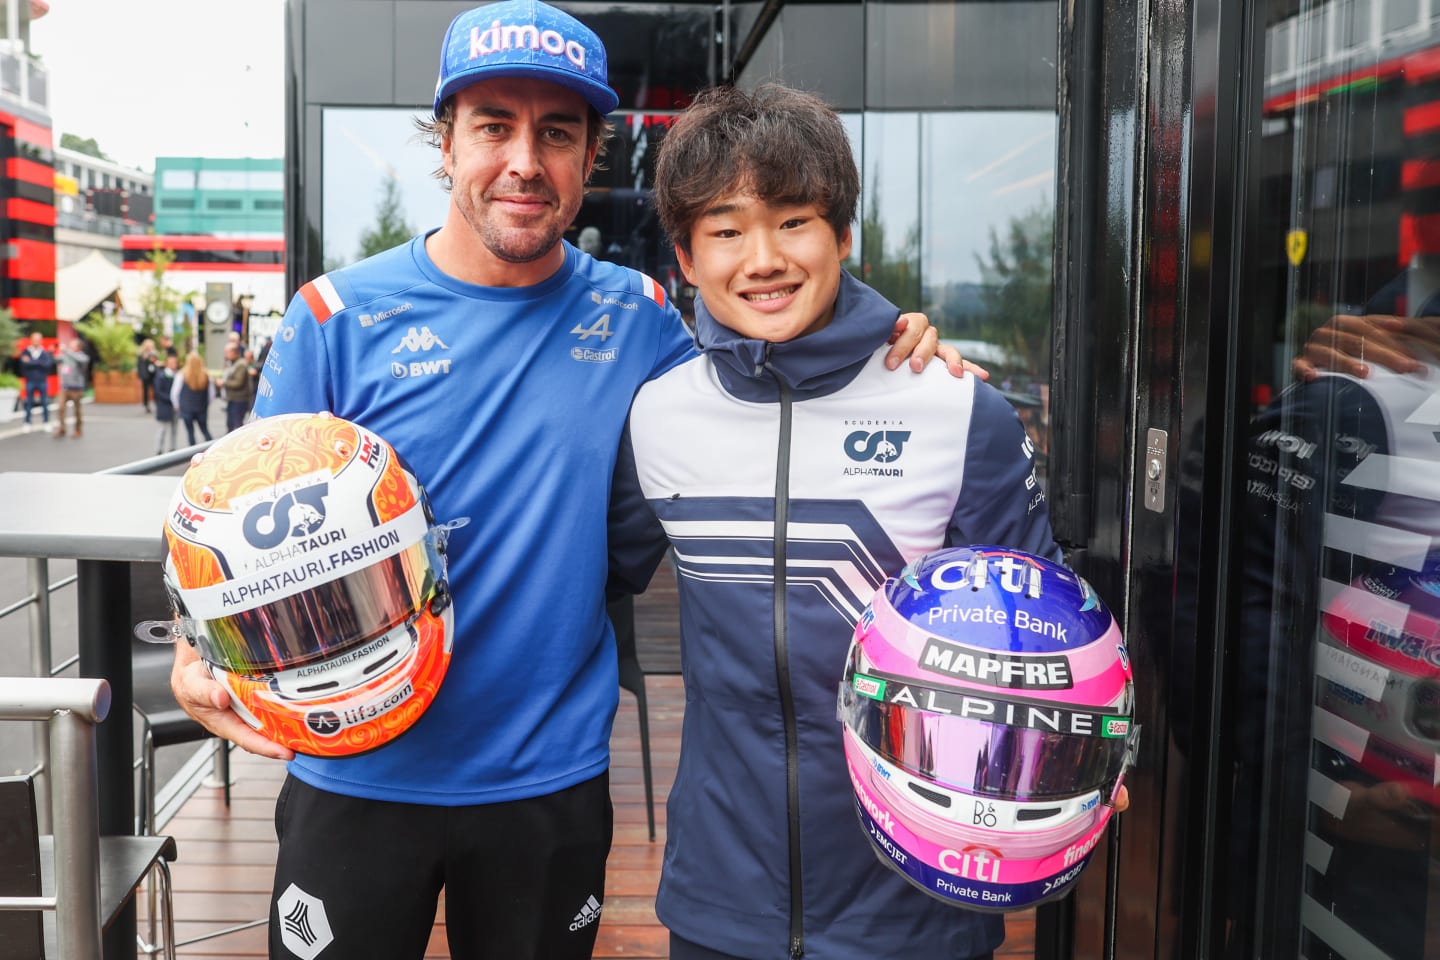 SPA, BELGIUM - AUGUST 27: Fernando Alonso of Alpine F1 and Spain and Yuki Tsunoda of Scuderia AlphaTauri and Japan swap crash helmets during qualifying ahead of the F1 Grand Prix of Belgium at Circuit de Spa-Francorchamps on August 27, 2022 in Spa, Belgium. (Photo by Peter Fox/Getty Images)